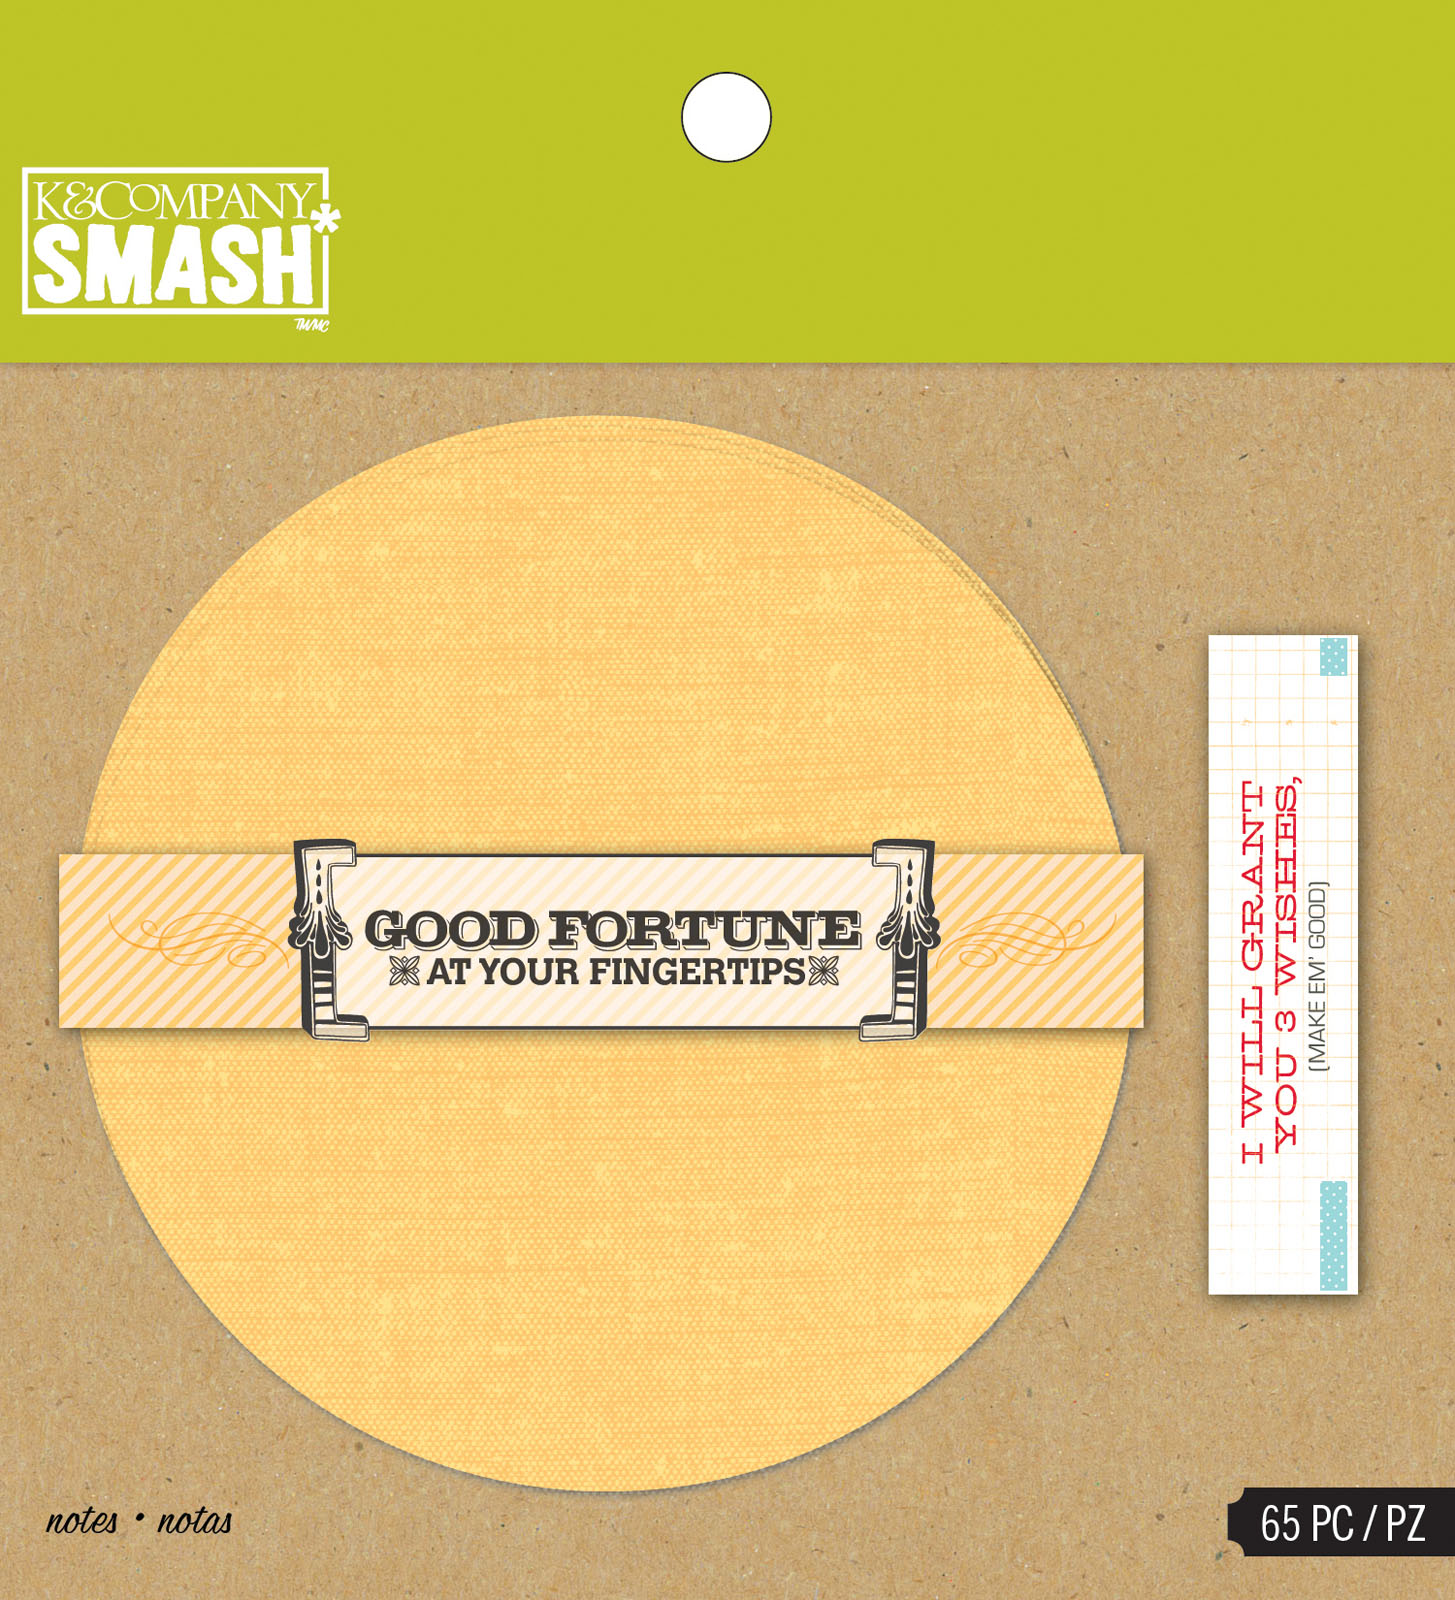 K&Company Smash • Fortune cookie notes